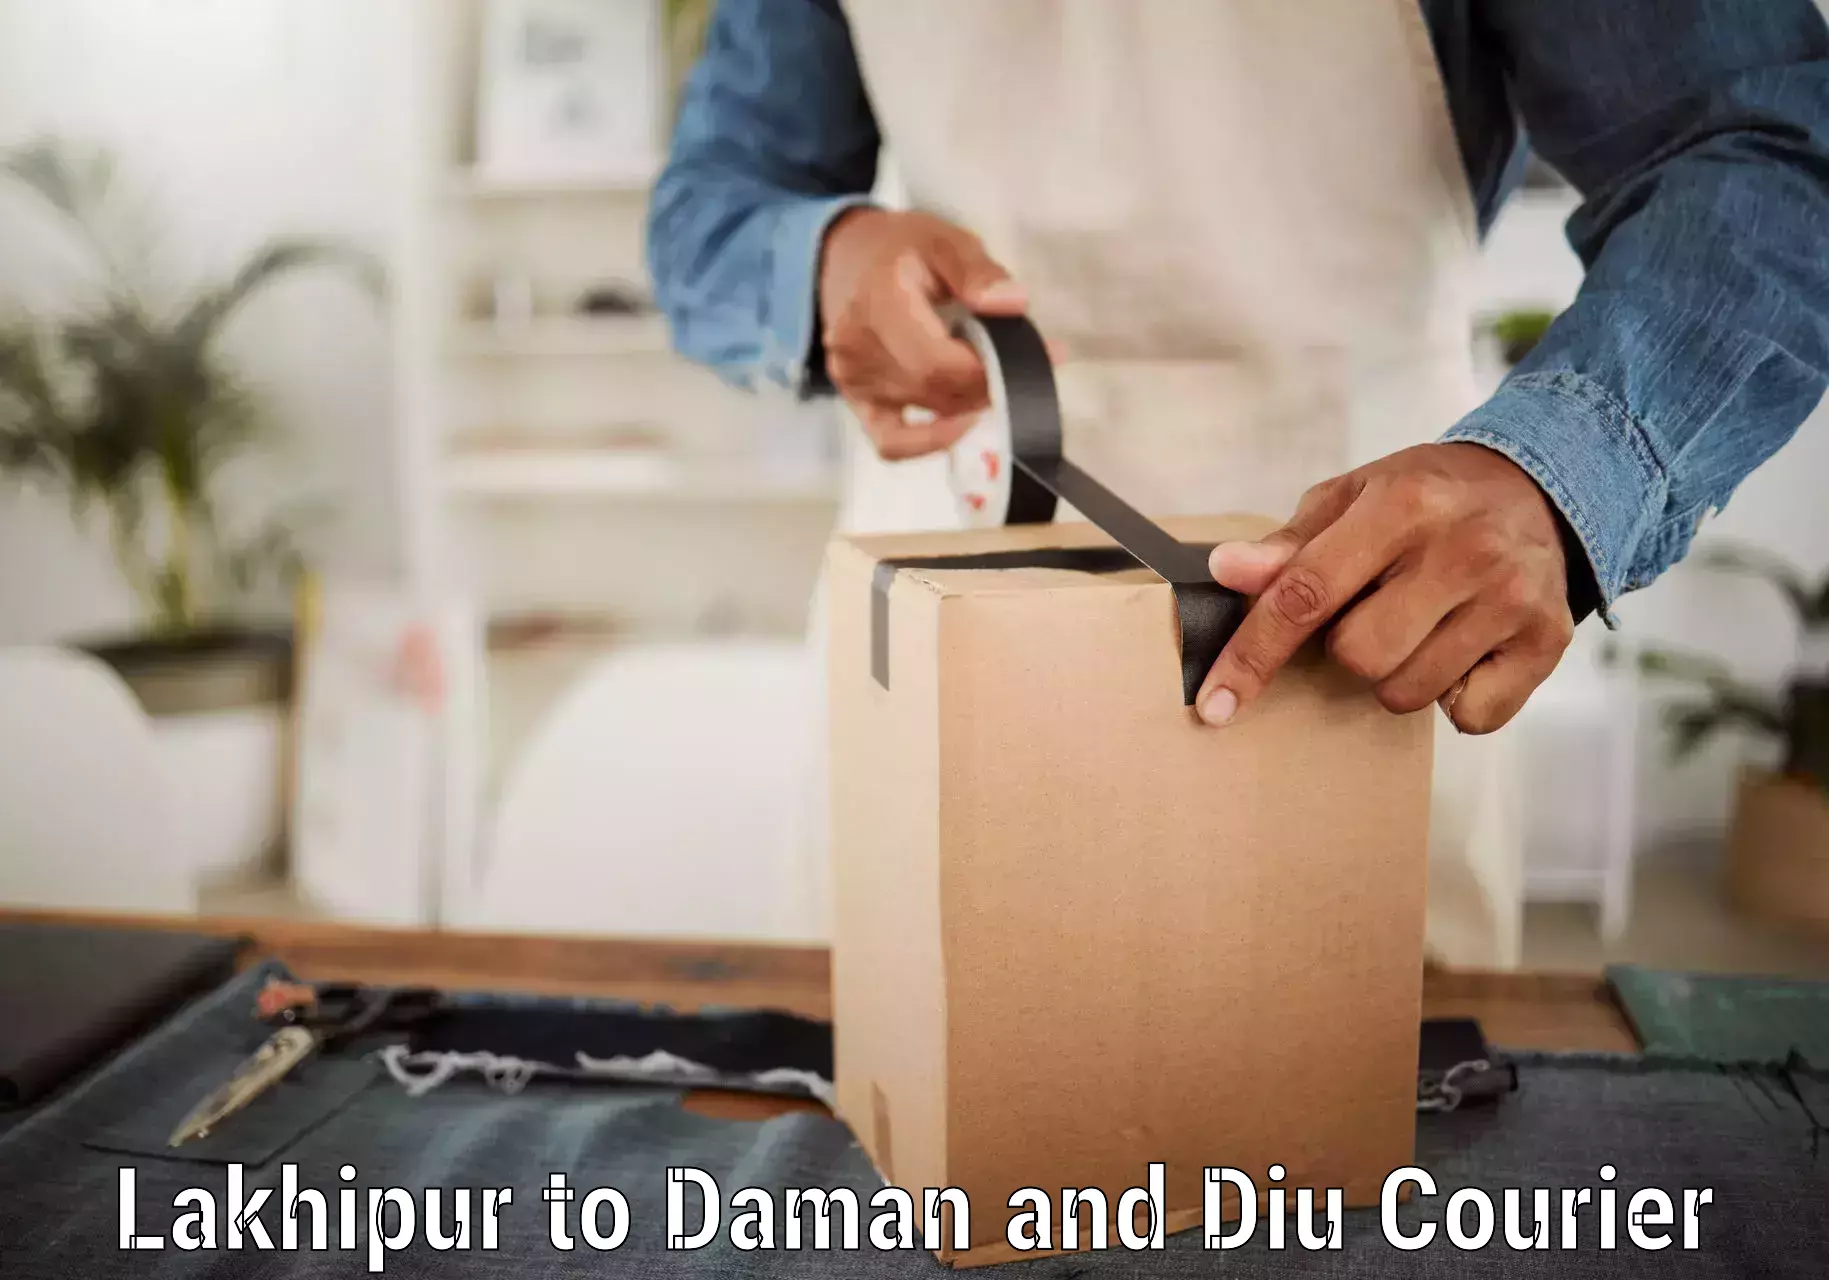 International courier networks Lakhipur to Diu